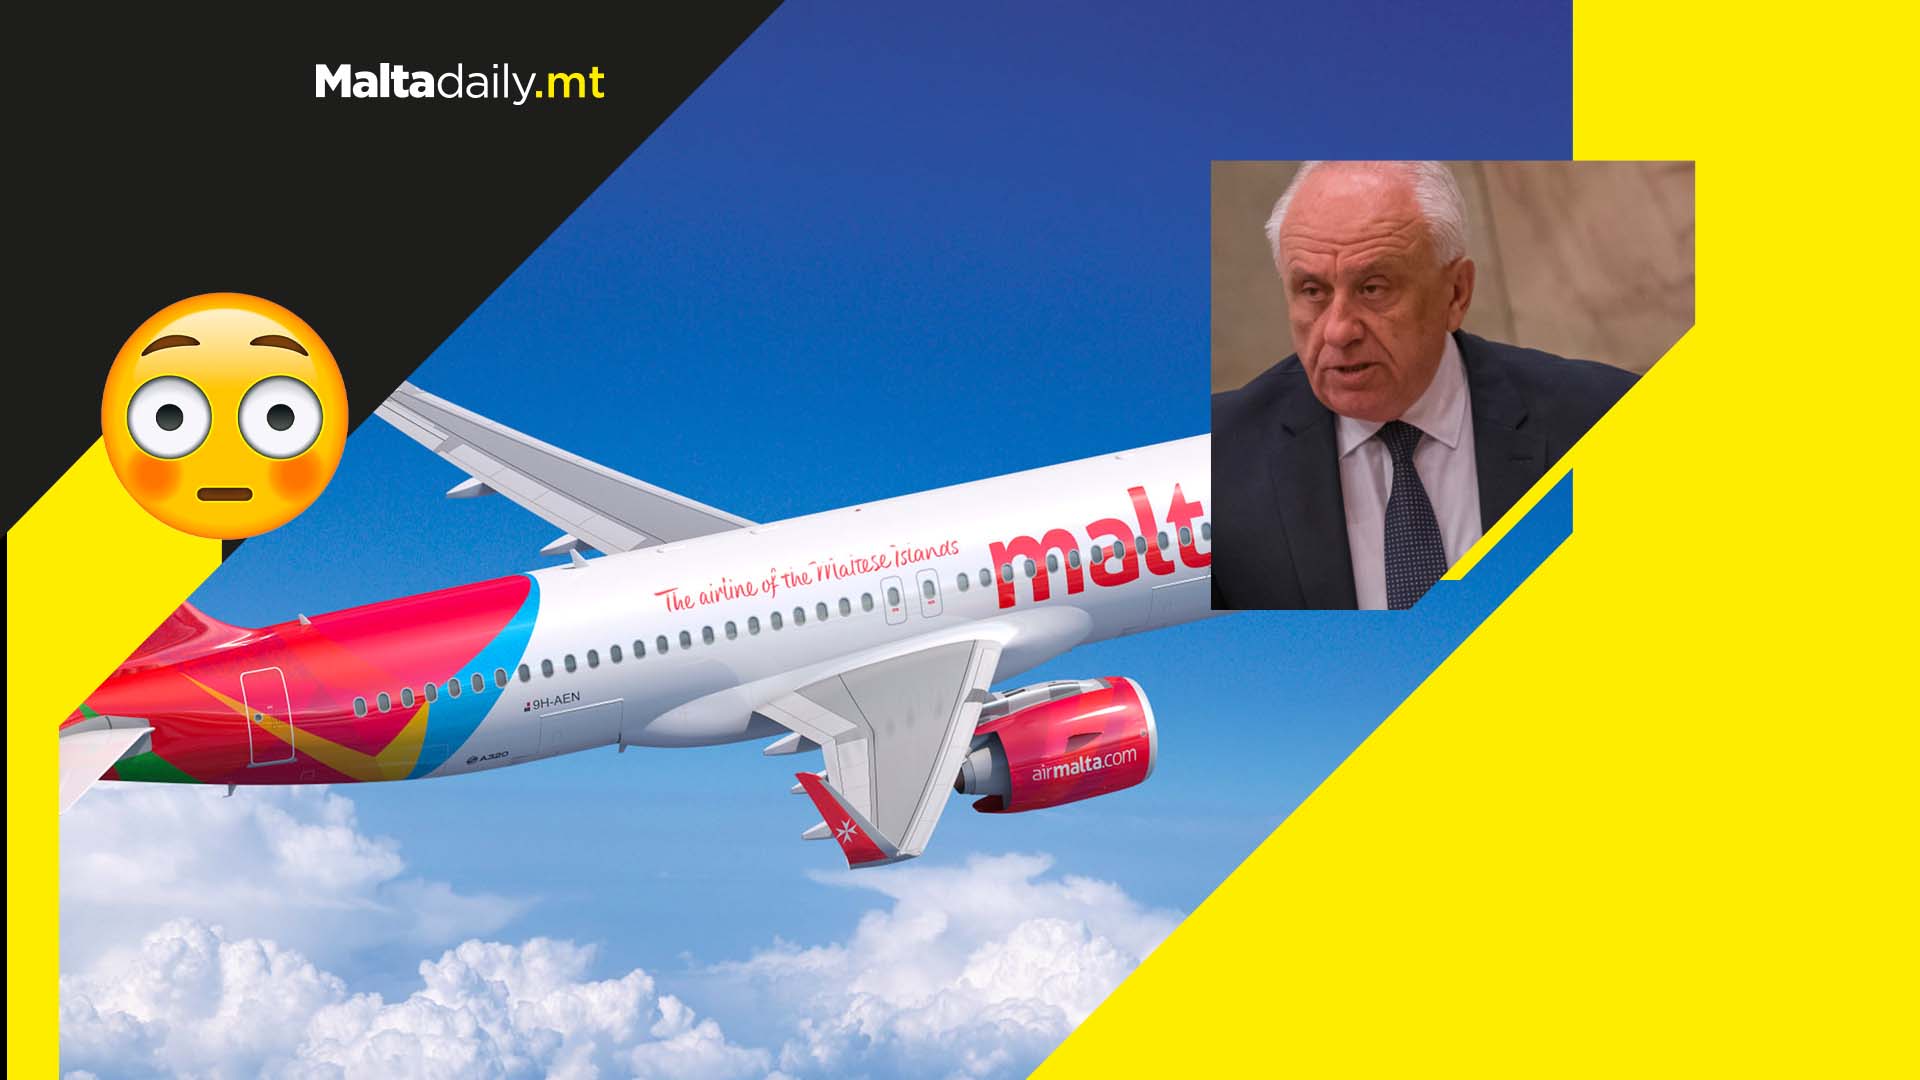 Air Malta has lost €258 million in the last 16 years